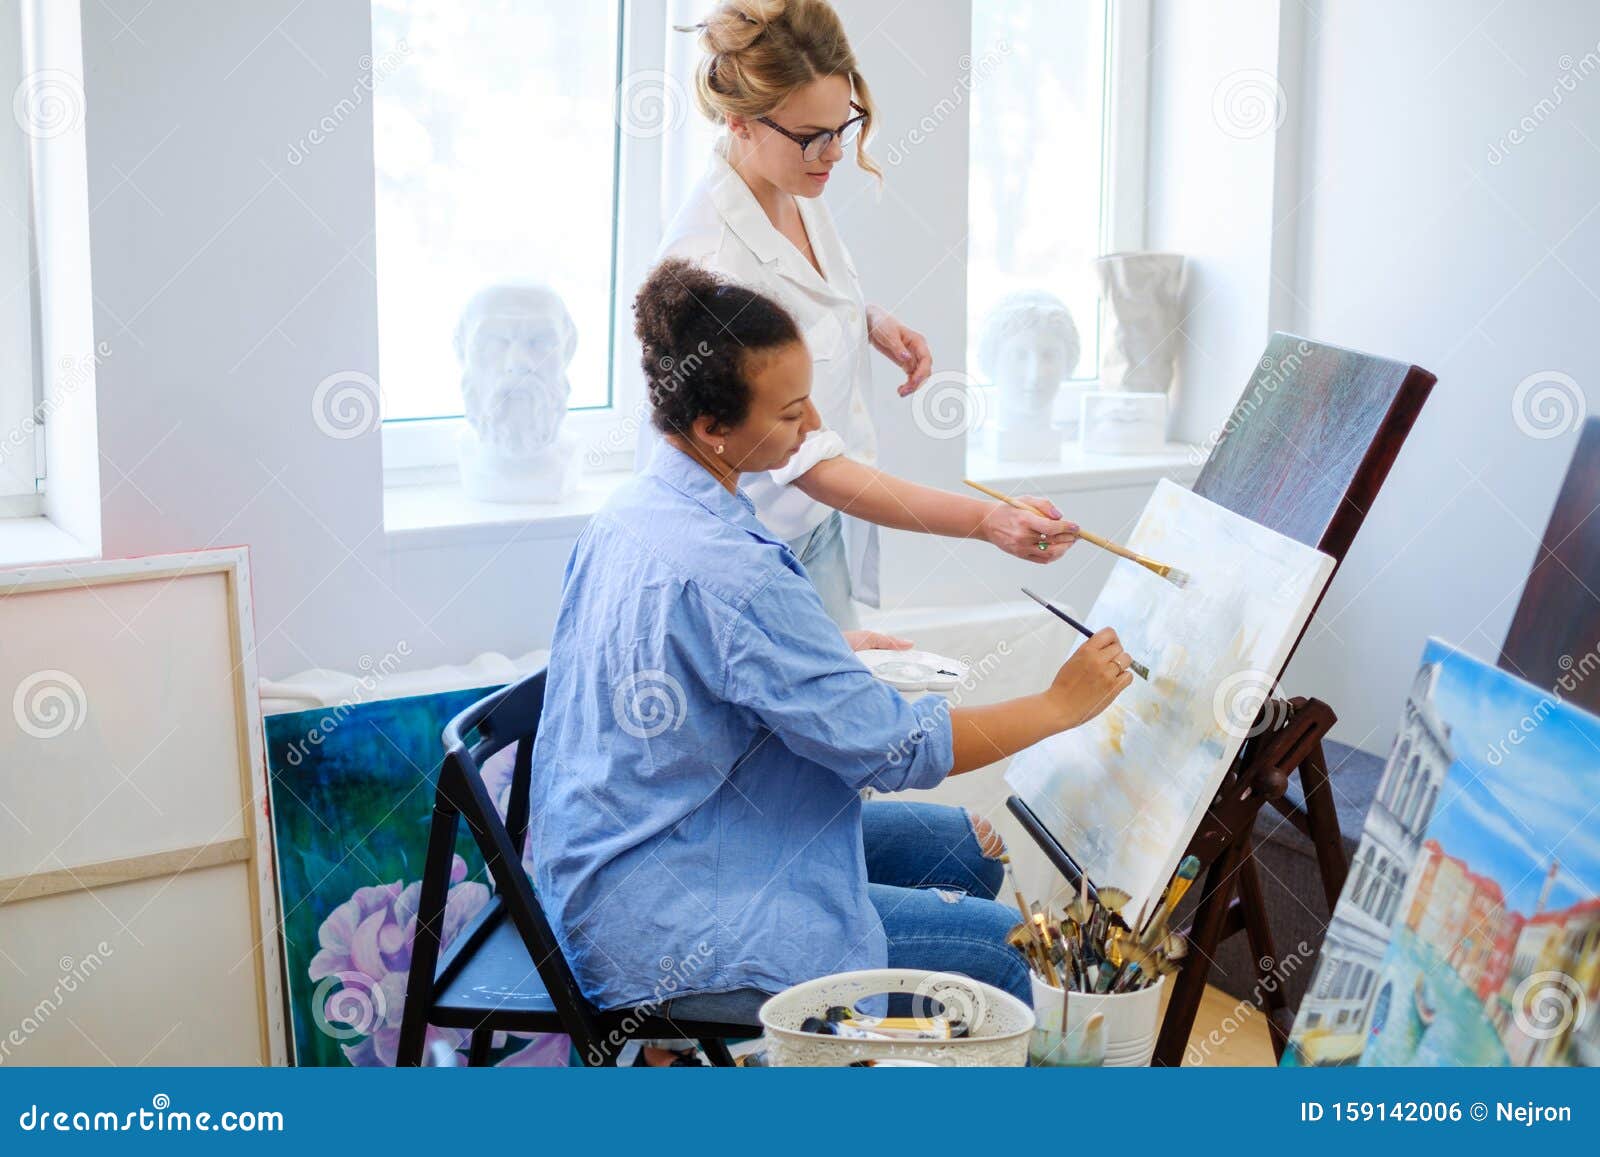 creative painter and her protege working in a studio